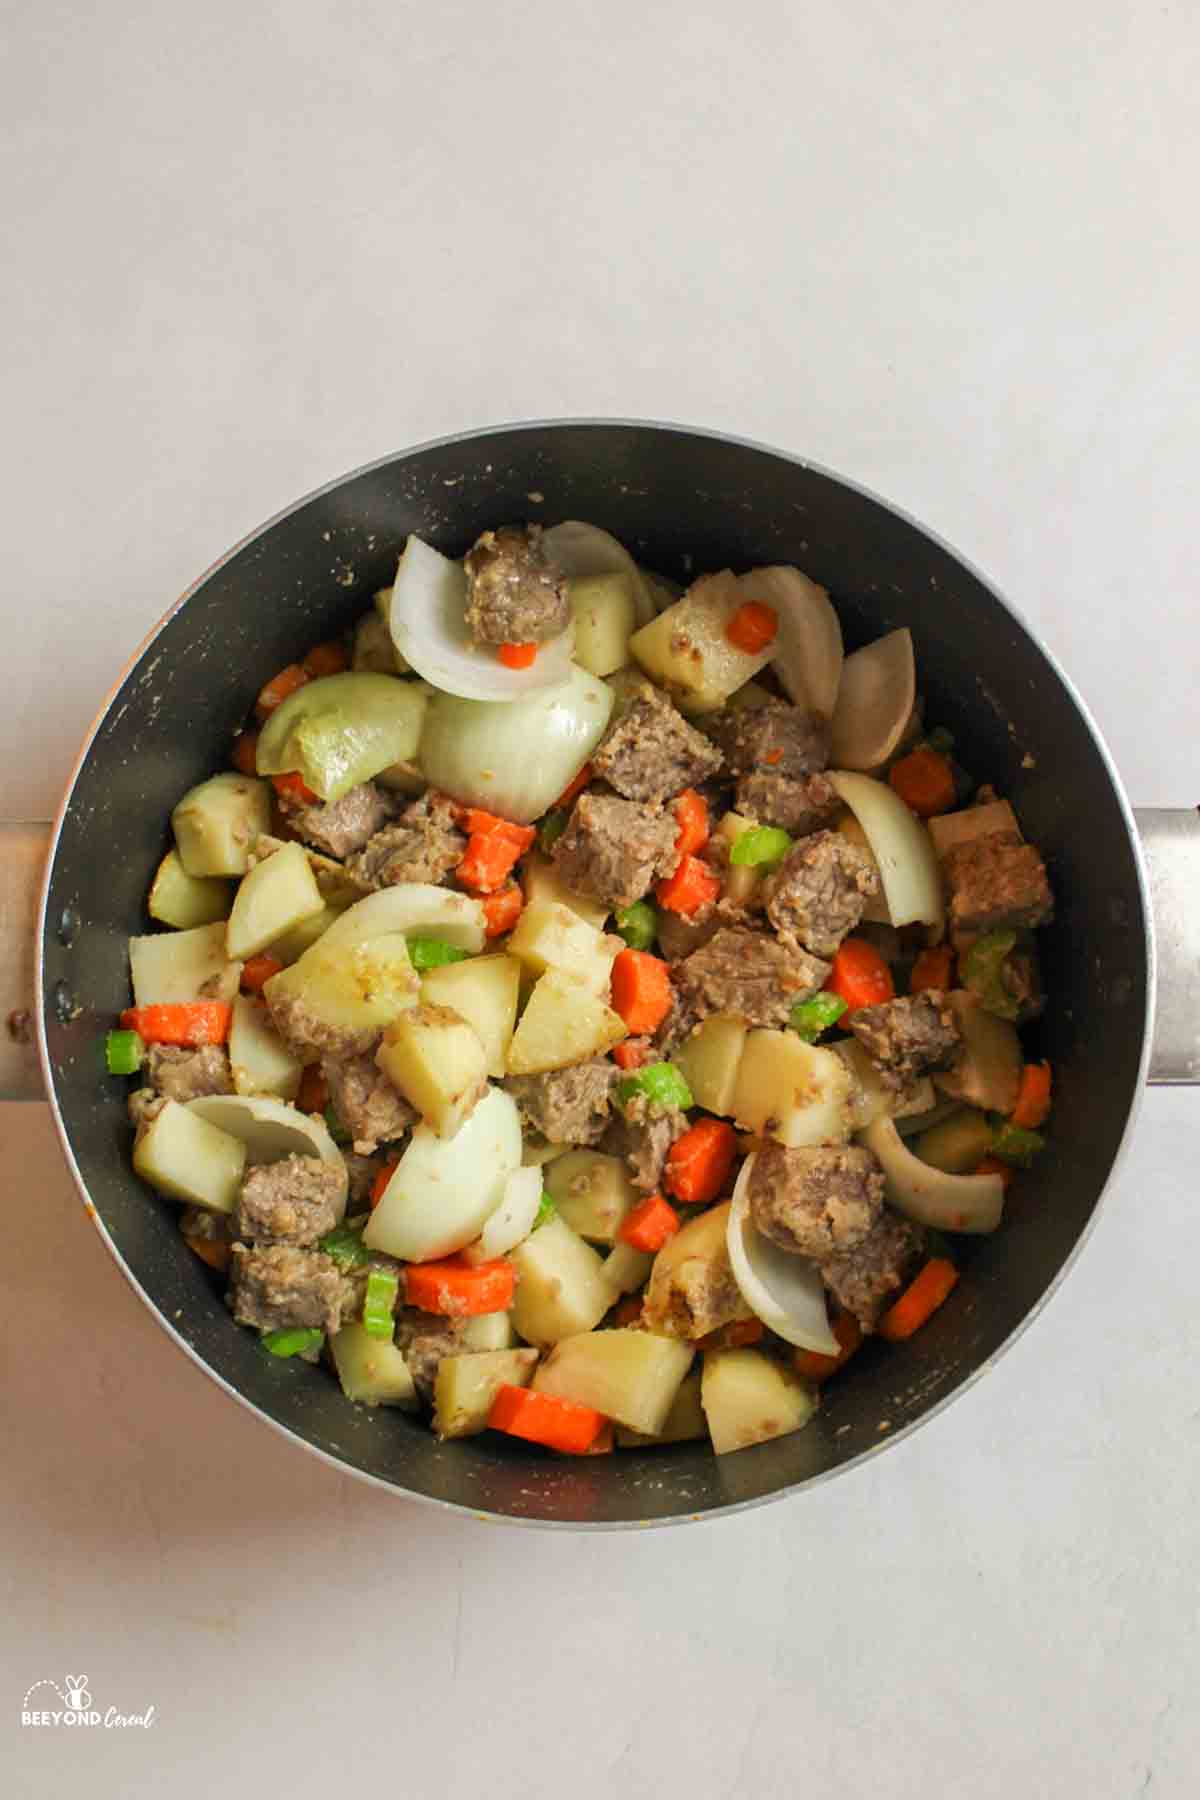 cooked veggies and beef in a large pot.